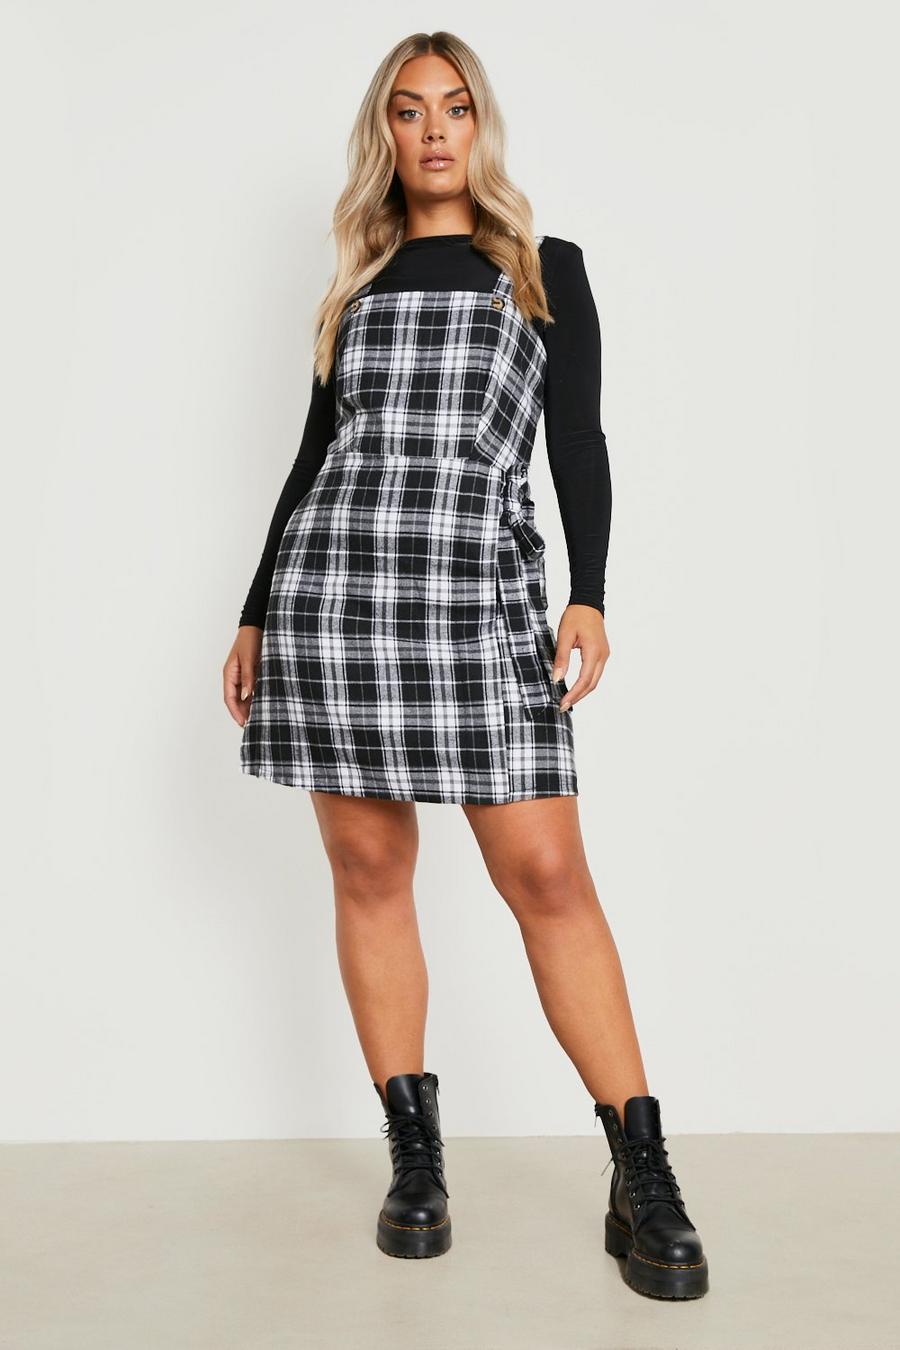 gakvbuo Clearance Items All 2022!Checkered Dress For Womens Plus